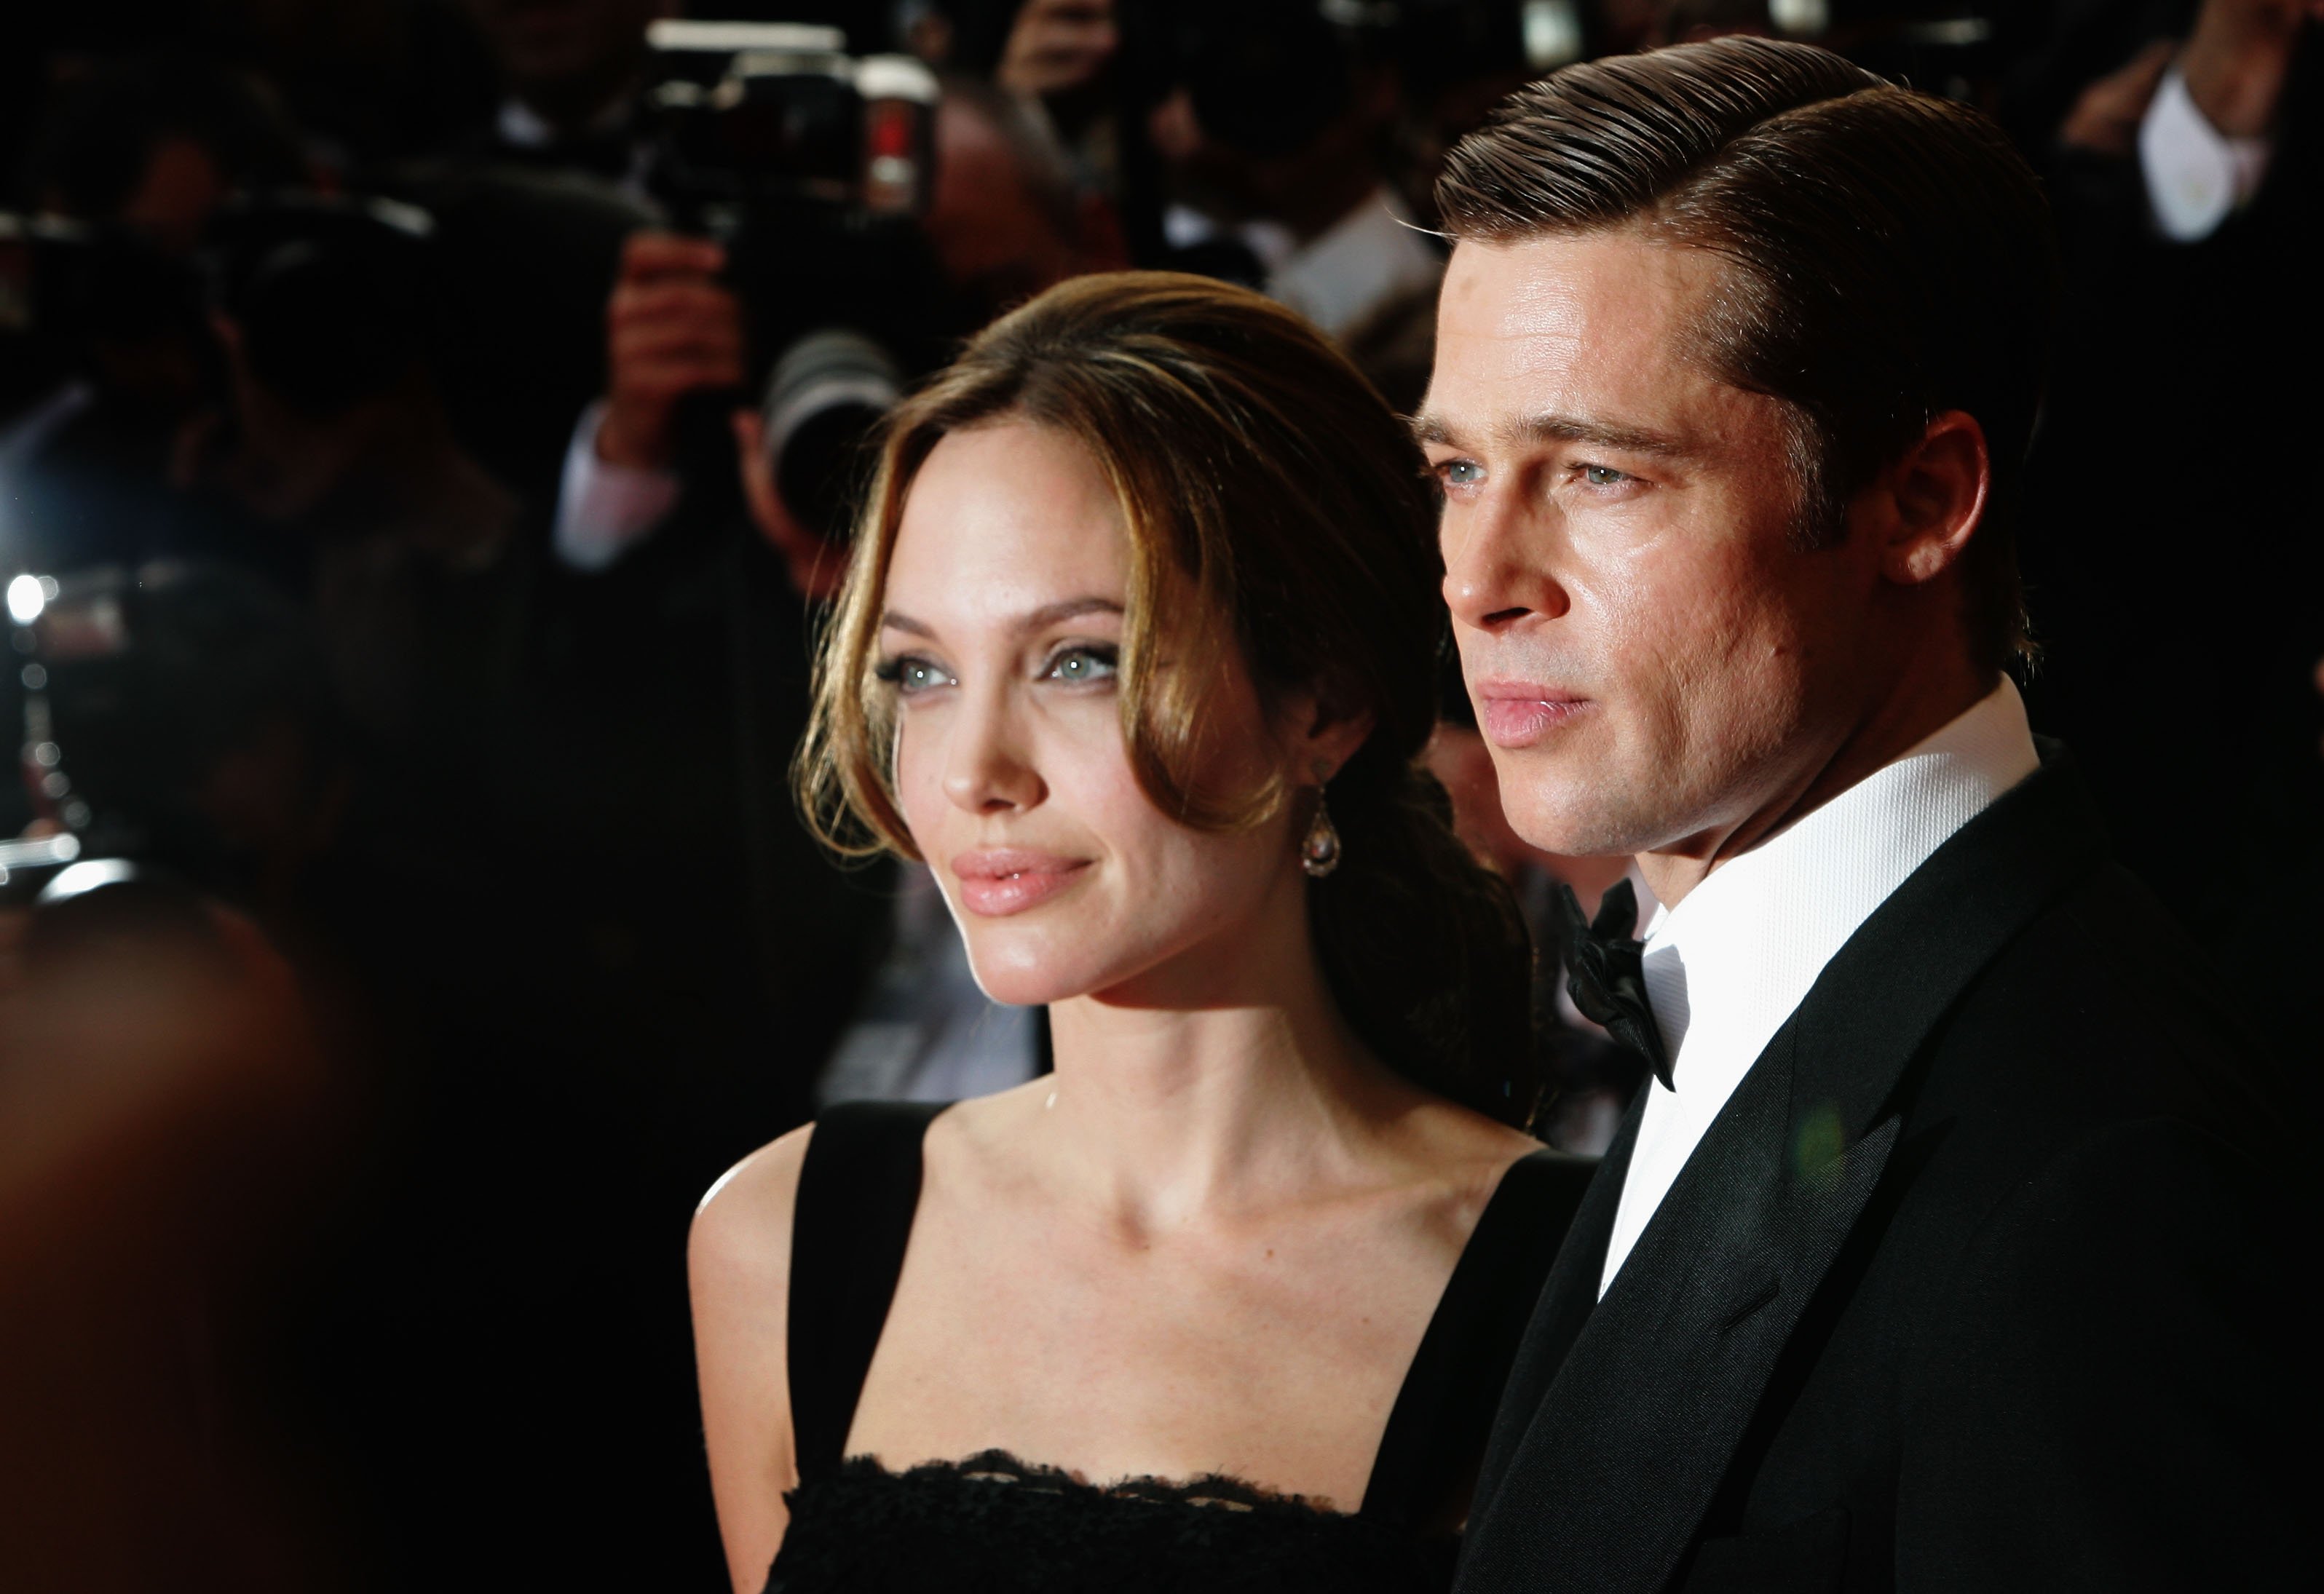 Angelina Jolie and Brad Pitt at the premiere for the film "A Mighty Heart" during the 60th International Cannes Film Festival on May 21, 2007, in France. | Source: Getty Images